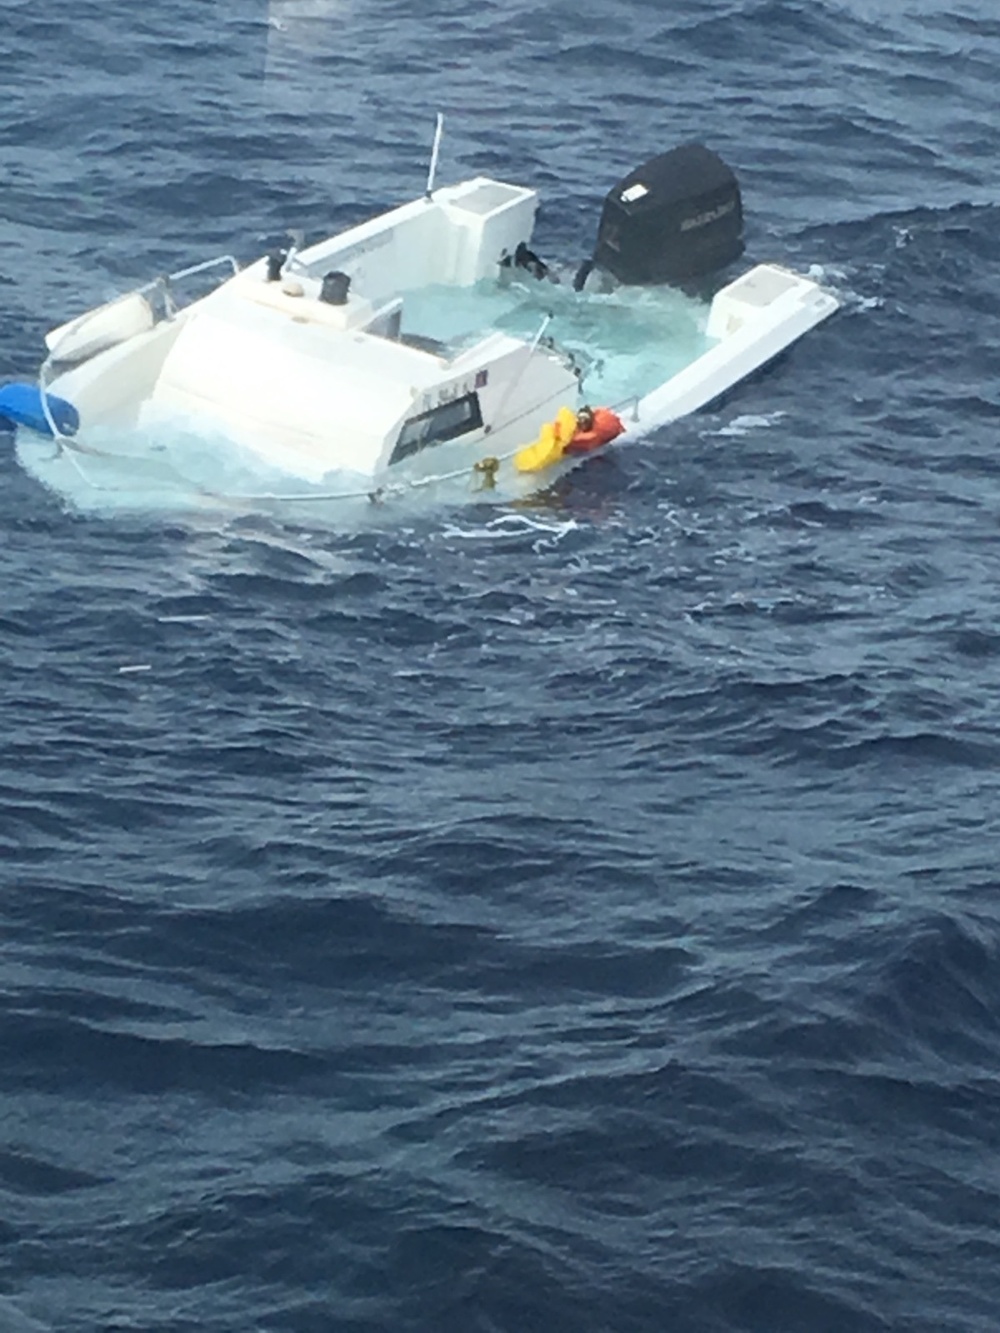 Coast Guard rescues man from vessel taking on water near West Palm Beach